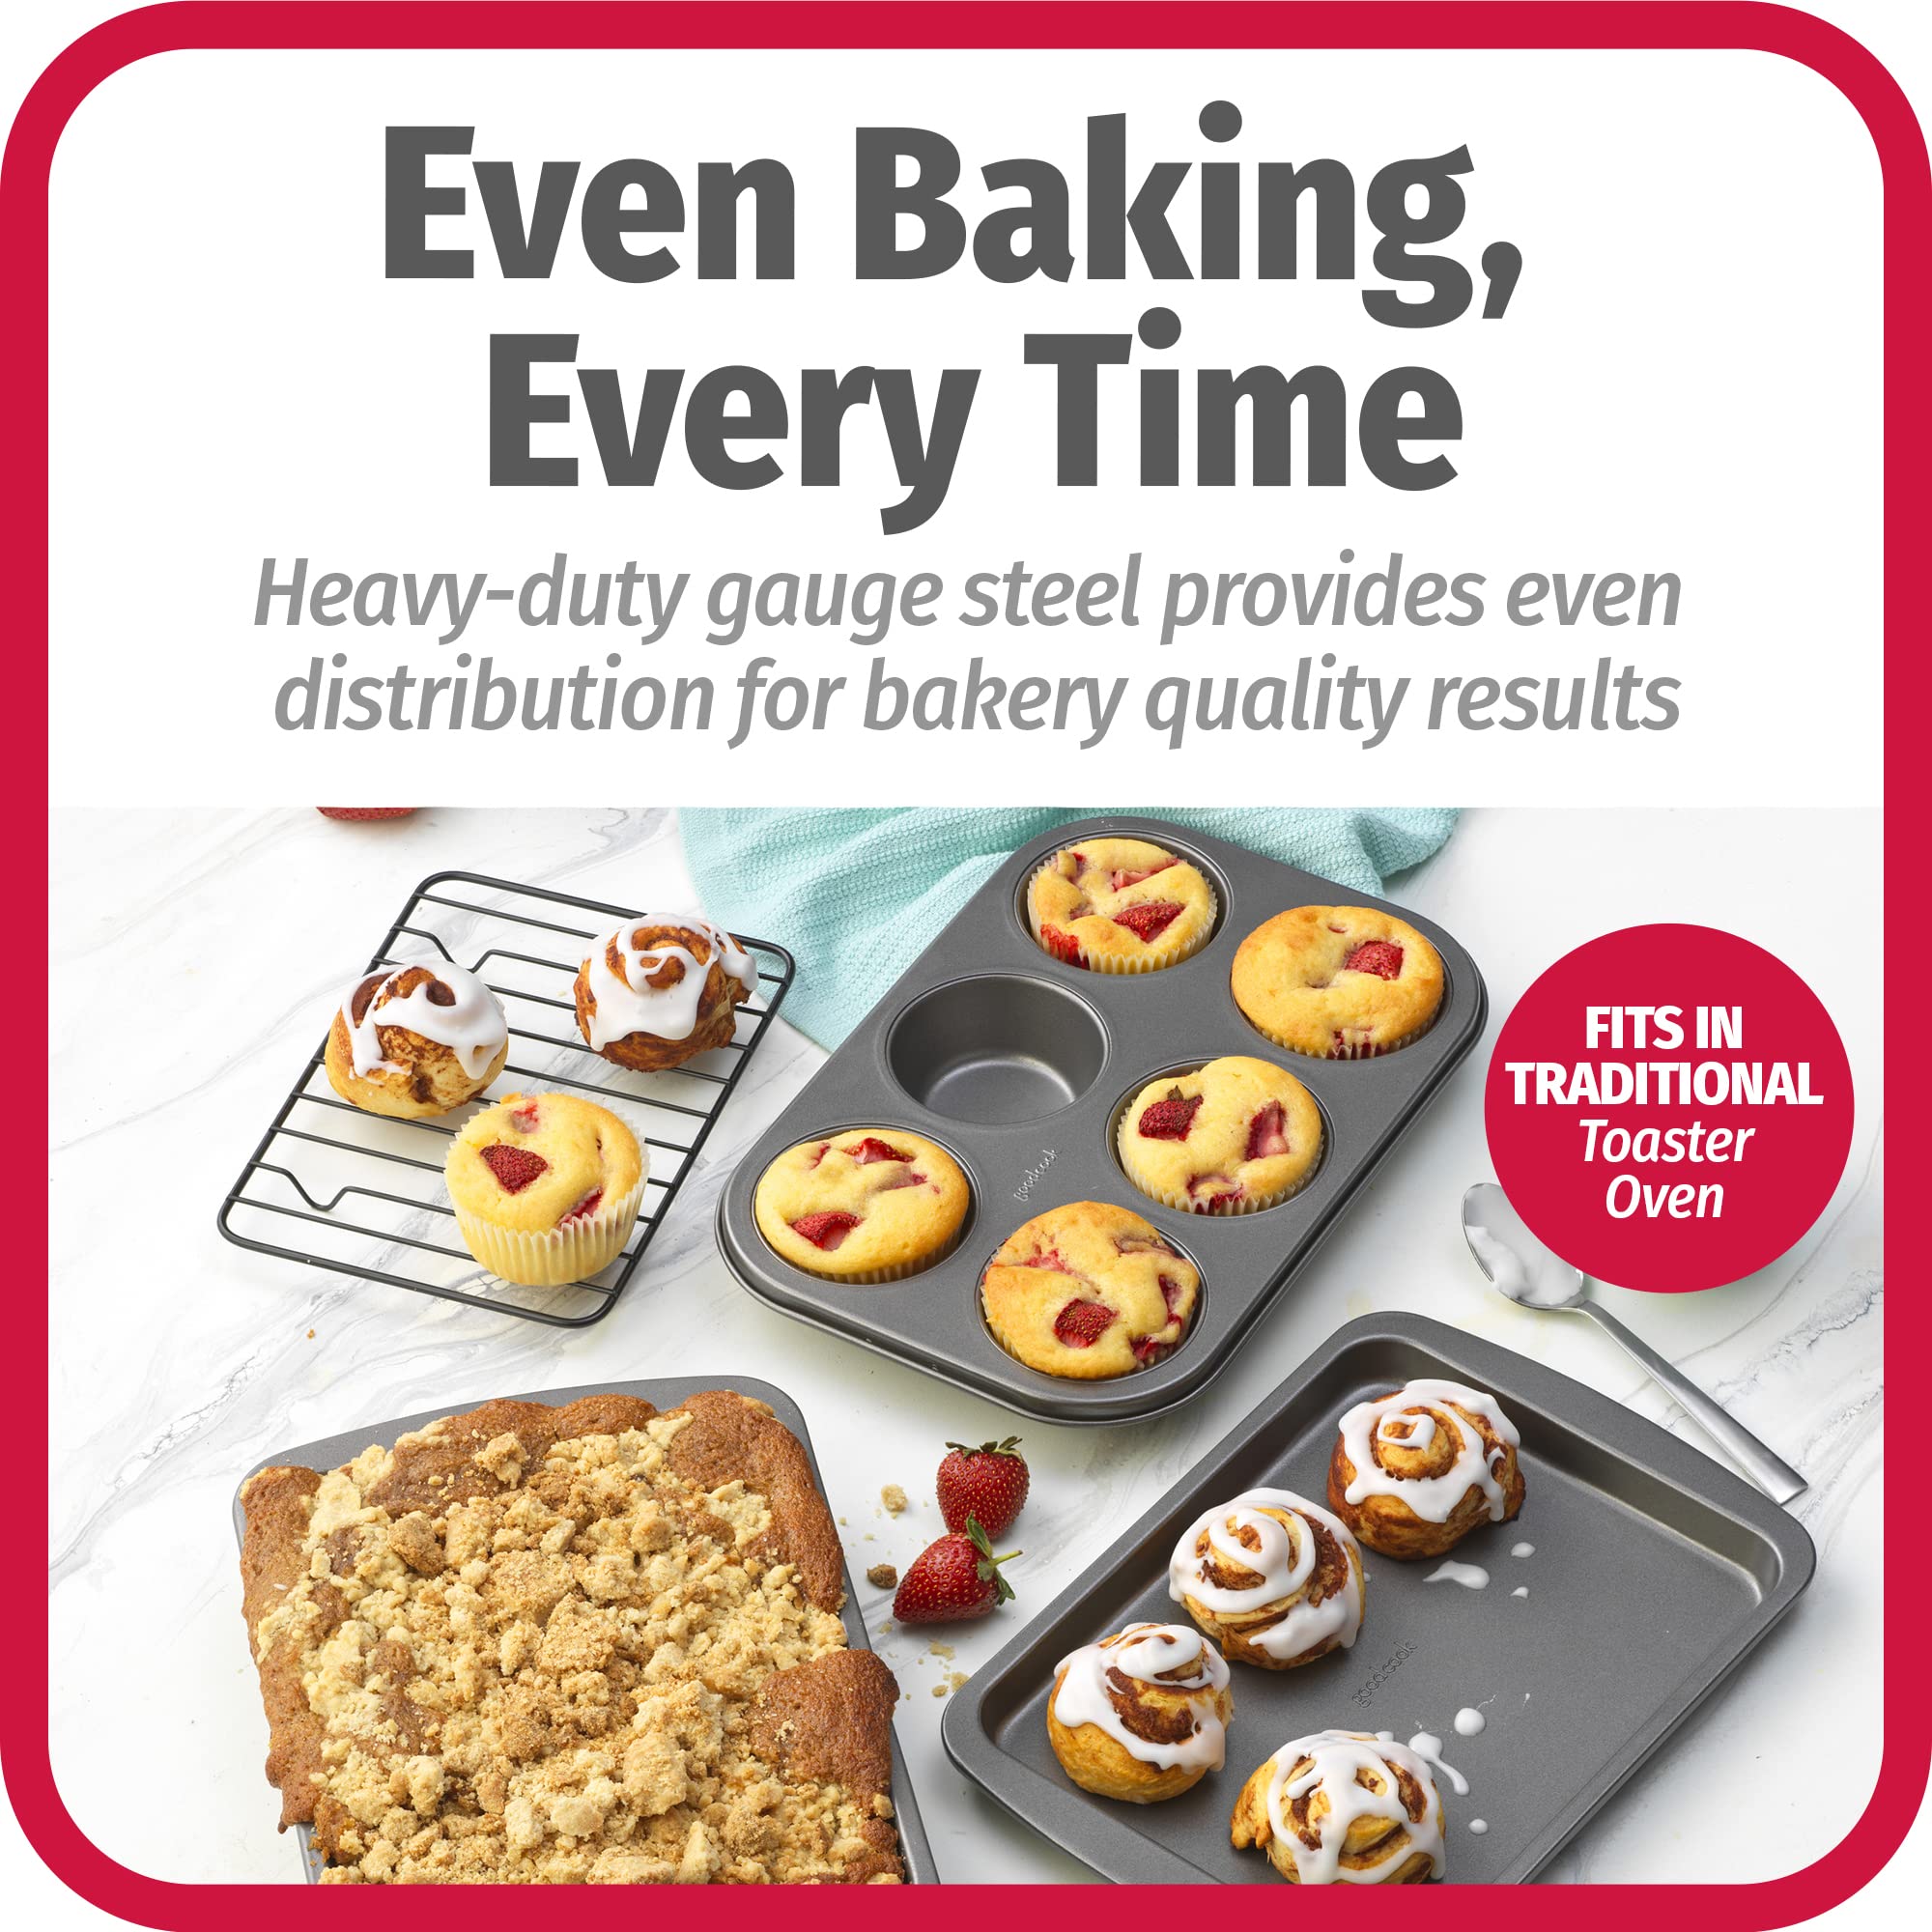 GoodCook 4-Piece Nonstick Steel Toaster Oven Set with Sheet Pan, Rack, Cake Pan, and Muffin Pan, Gray (4220)